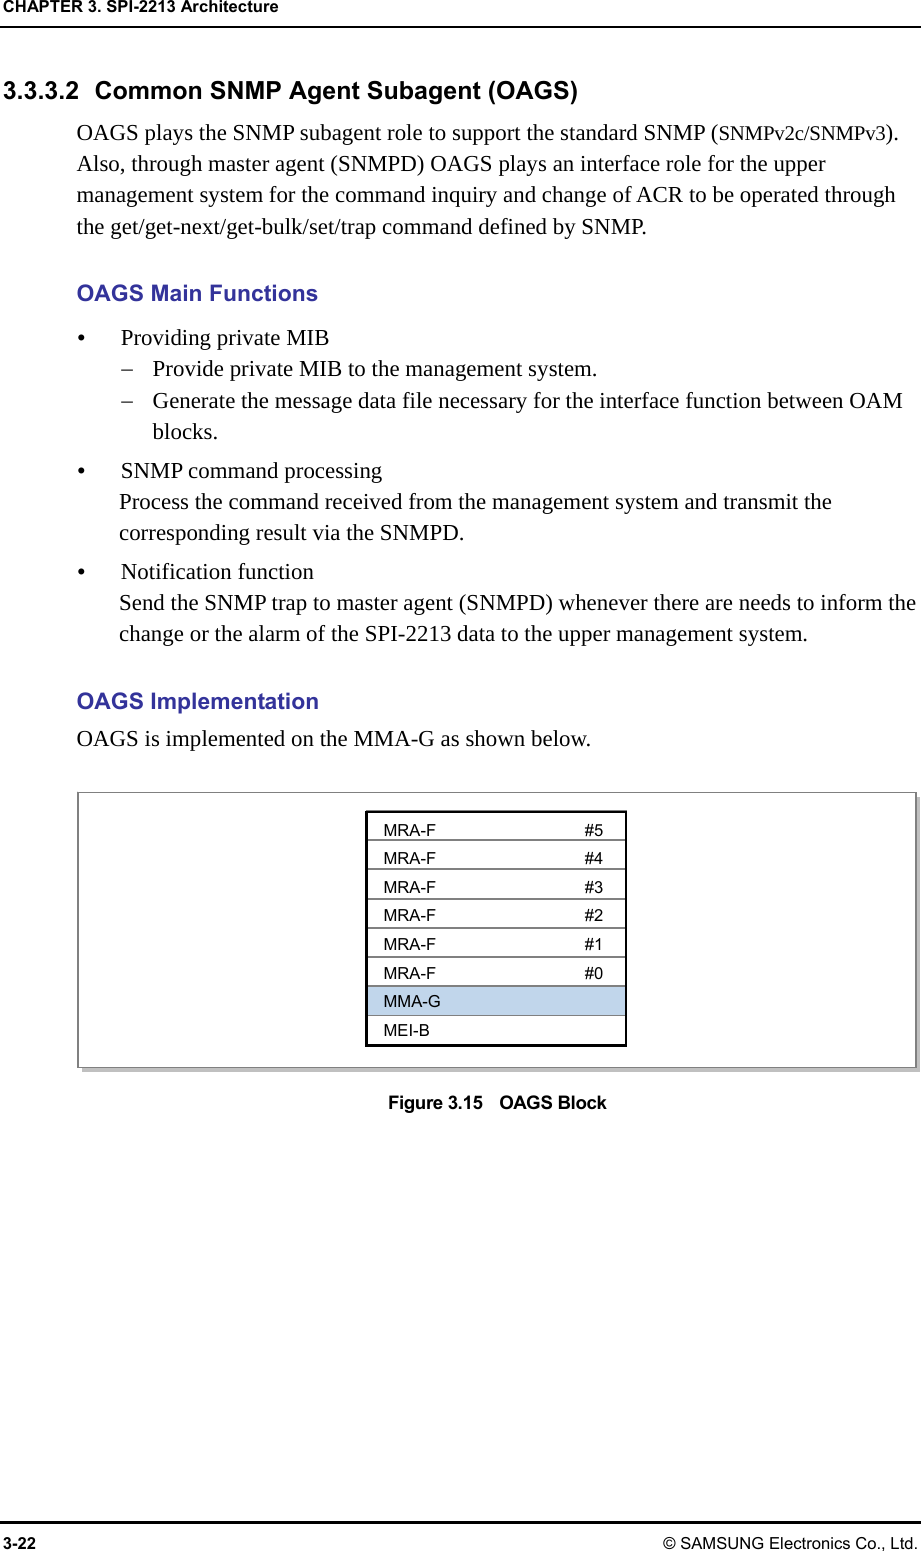 CHAPTER 3. SPI-2213 Architecture 3-22 © SAMSUNG Electronics Co., Ltd. 3.3.3.2  Common SNMP Agent Subagent (OAGS) OAGS plays the SNMP subagent role to support the standard SNMP (SNMPv2c/SNMPv3). Also, through master agent (SNMPD) OAGS plays an interface role for the upper management system for the command inquiry and change of ACR to be operated through the get/get-next/get-bulk/set/trap command defined by SNMP.  OAGS Main Functions y Providing private MIB − Provide private MIB to the management system. − Generate the message data file necessary for the interface function between OAM blocks. y SNMP command processing Process the command received from the management system and transmit the corresponding result via the SNMPD. y Notification function Send the SNMP trap to master agent (SNMPD) whenever there are needs to inform the change or the alarm of the SPI-2213 data to the upper management system.  OAGS Implementation OAGS is implemented on the MMA-G as shown below.  Figure 3.15    OAGS Block MRA-F #5 MRA-F #4 MRA-F #3 MRA-F #2 MRA-F #1 MRA-F #0 MMA-G MEI-B 